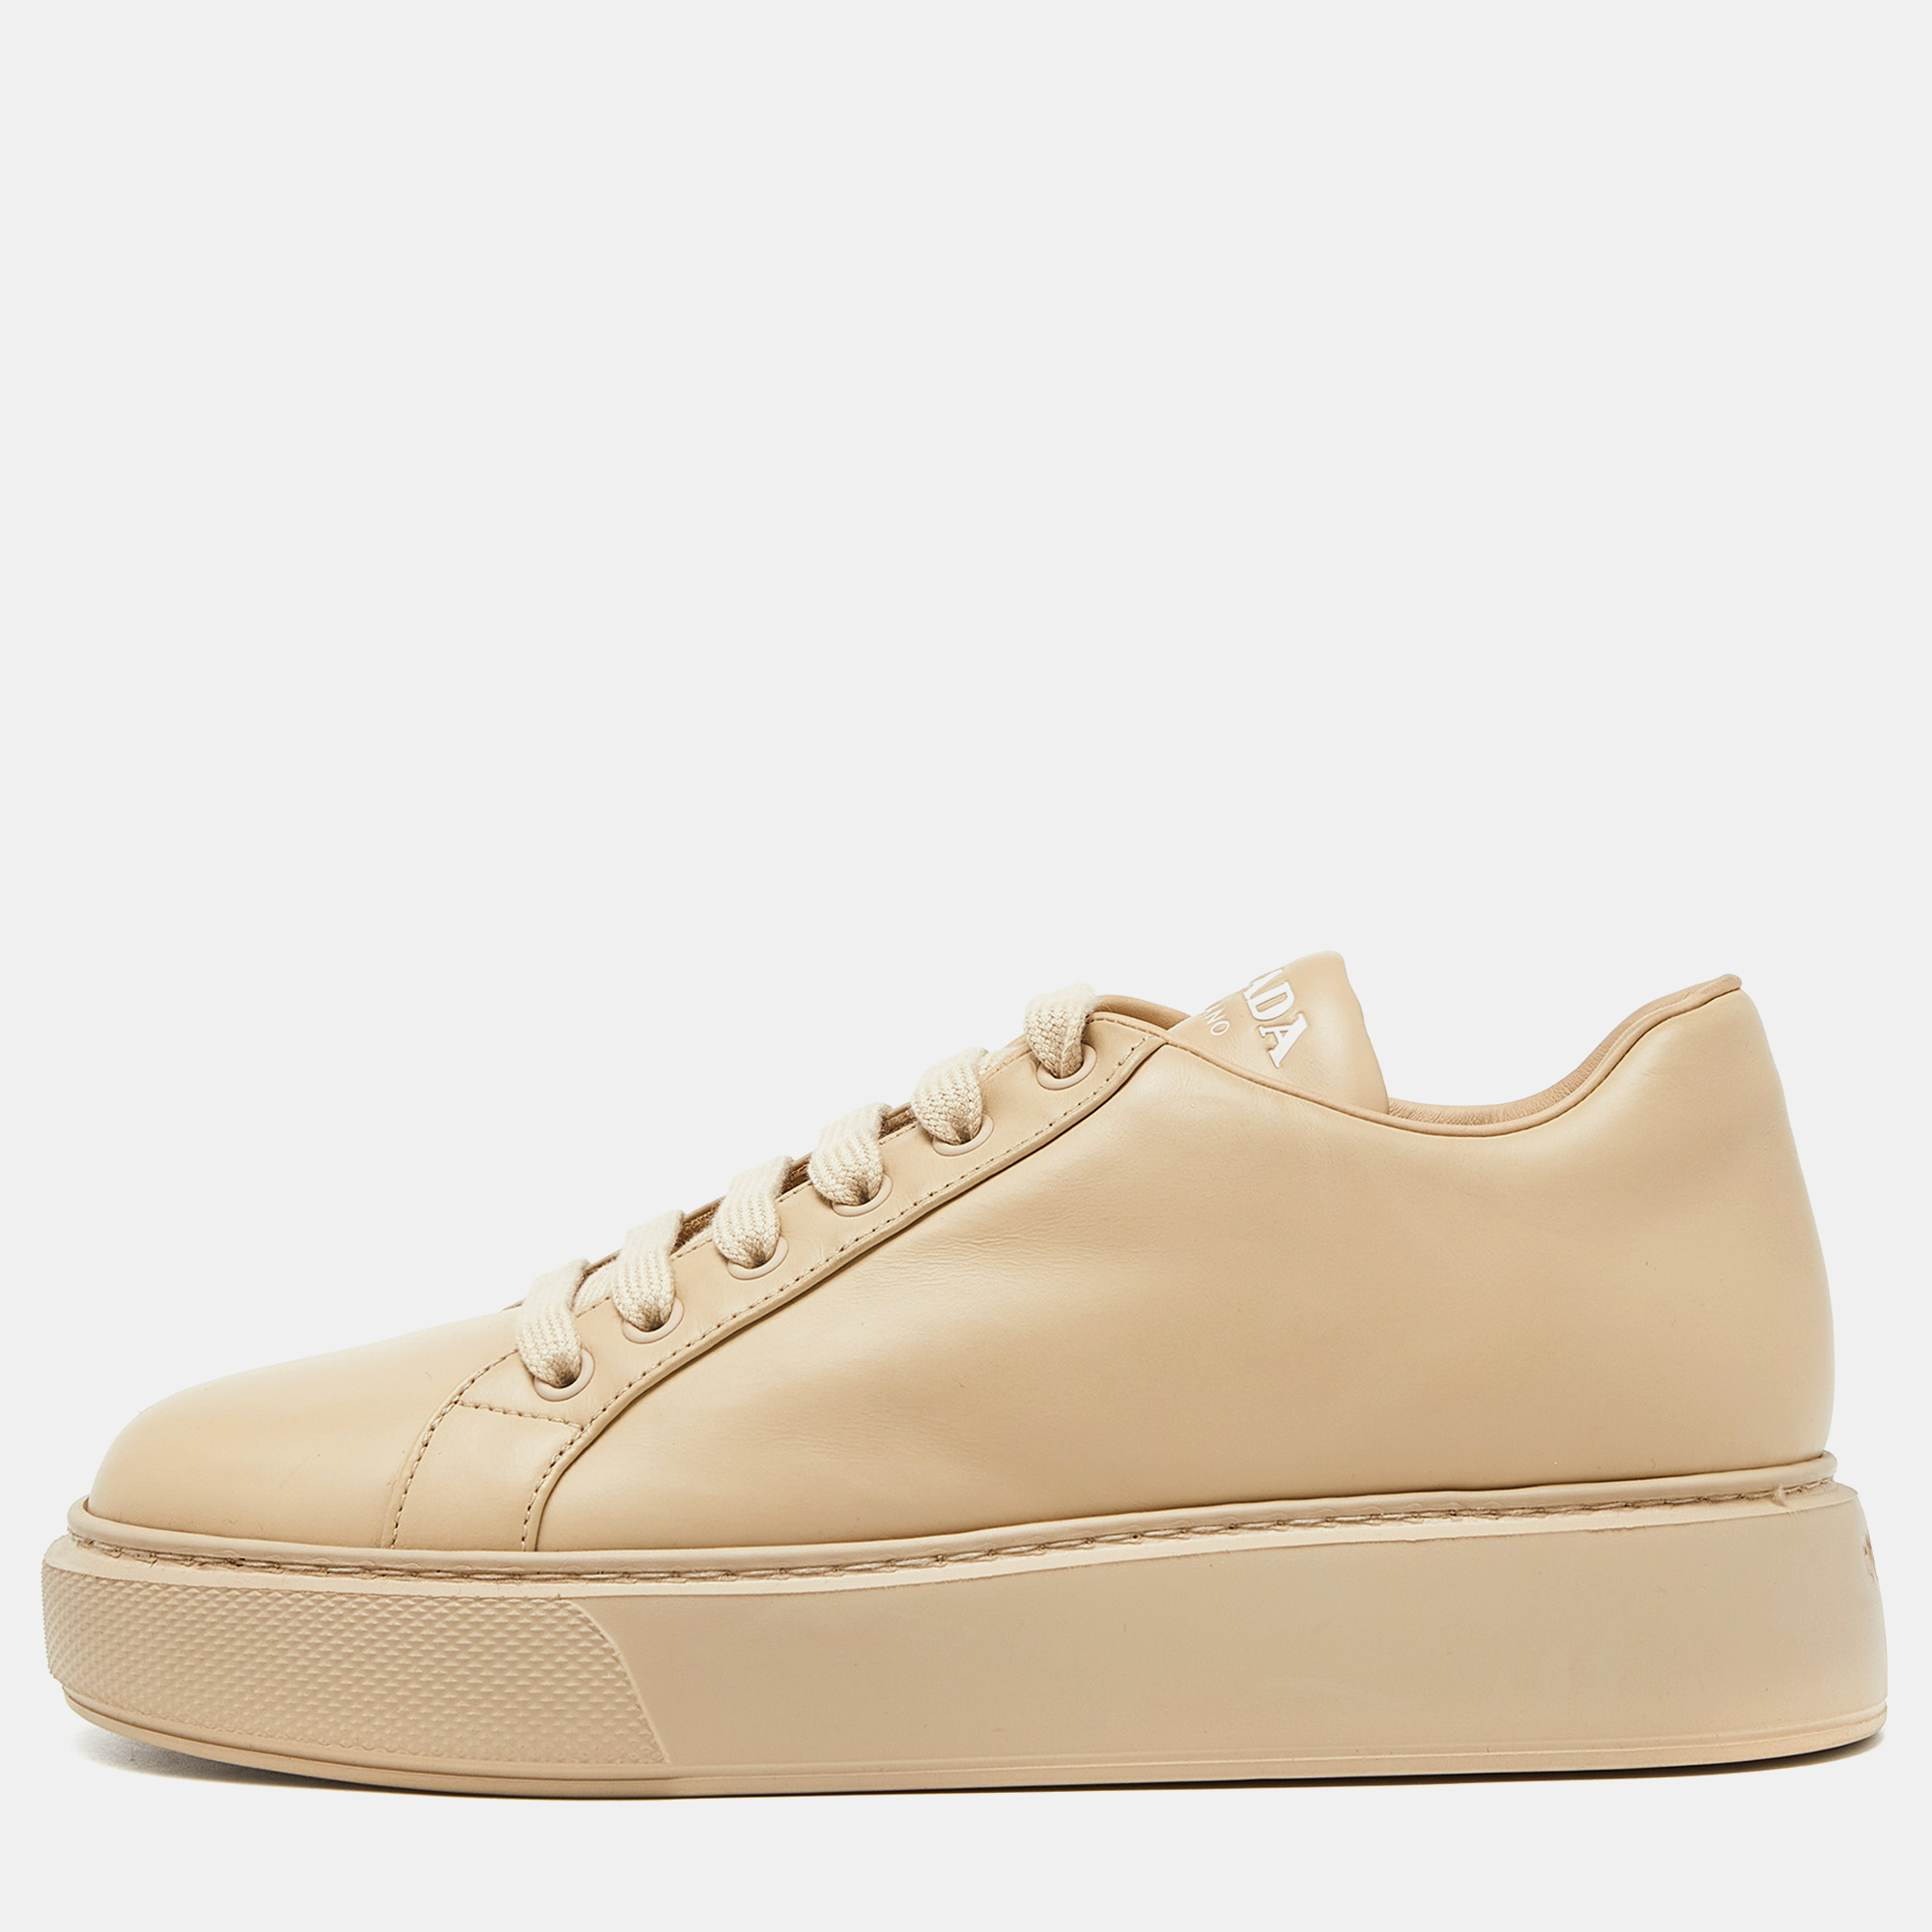 Pre-owned Prada Beige Leather Low Top Sneakers Size 39